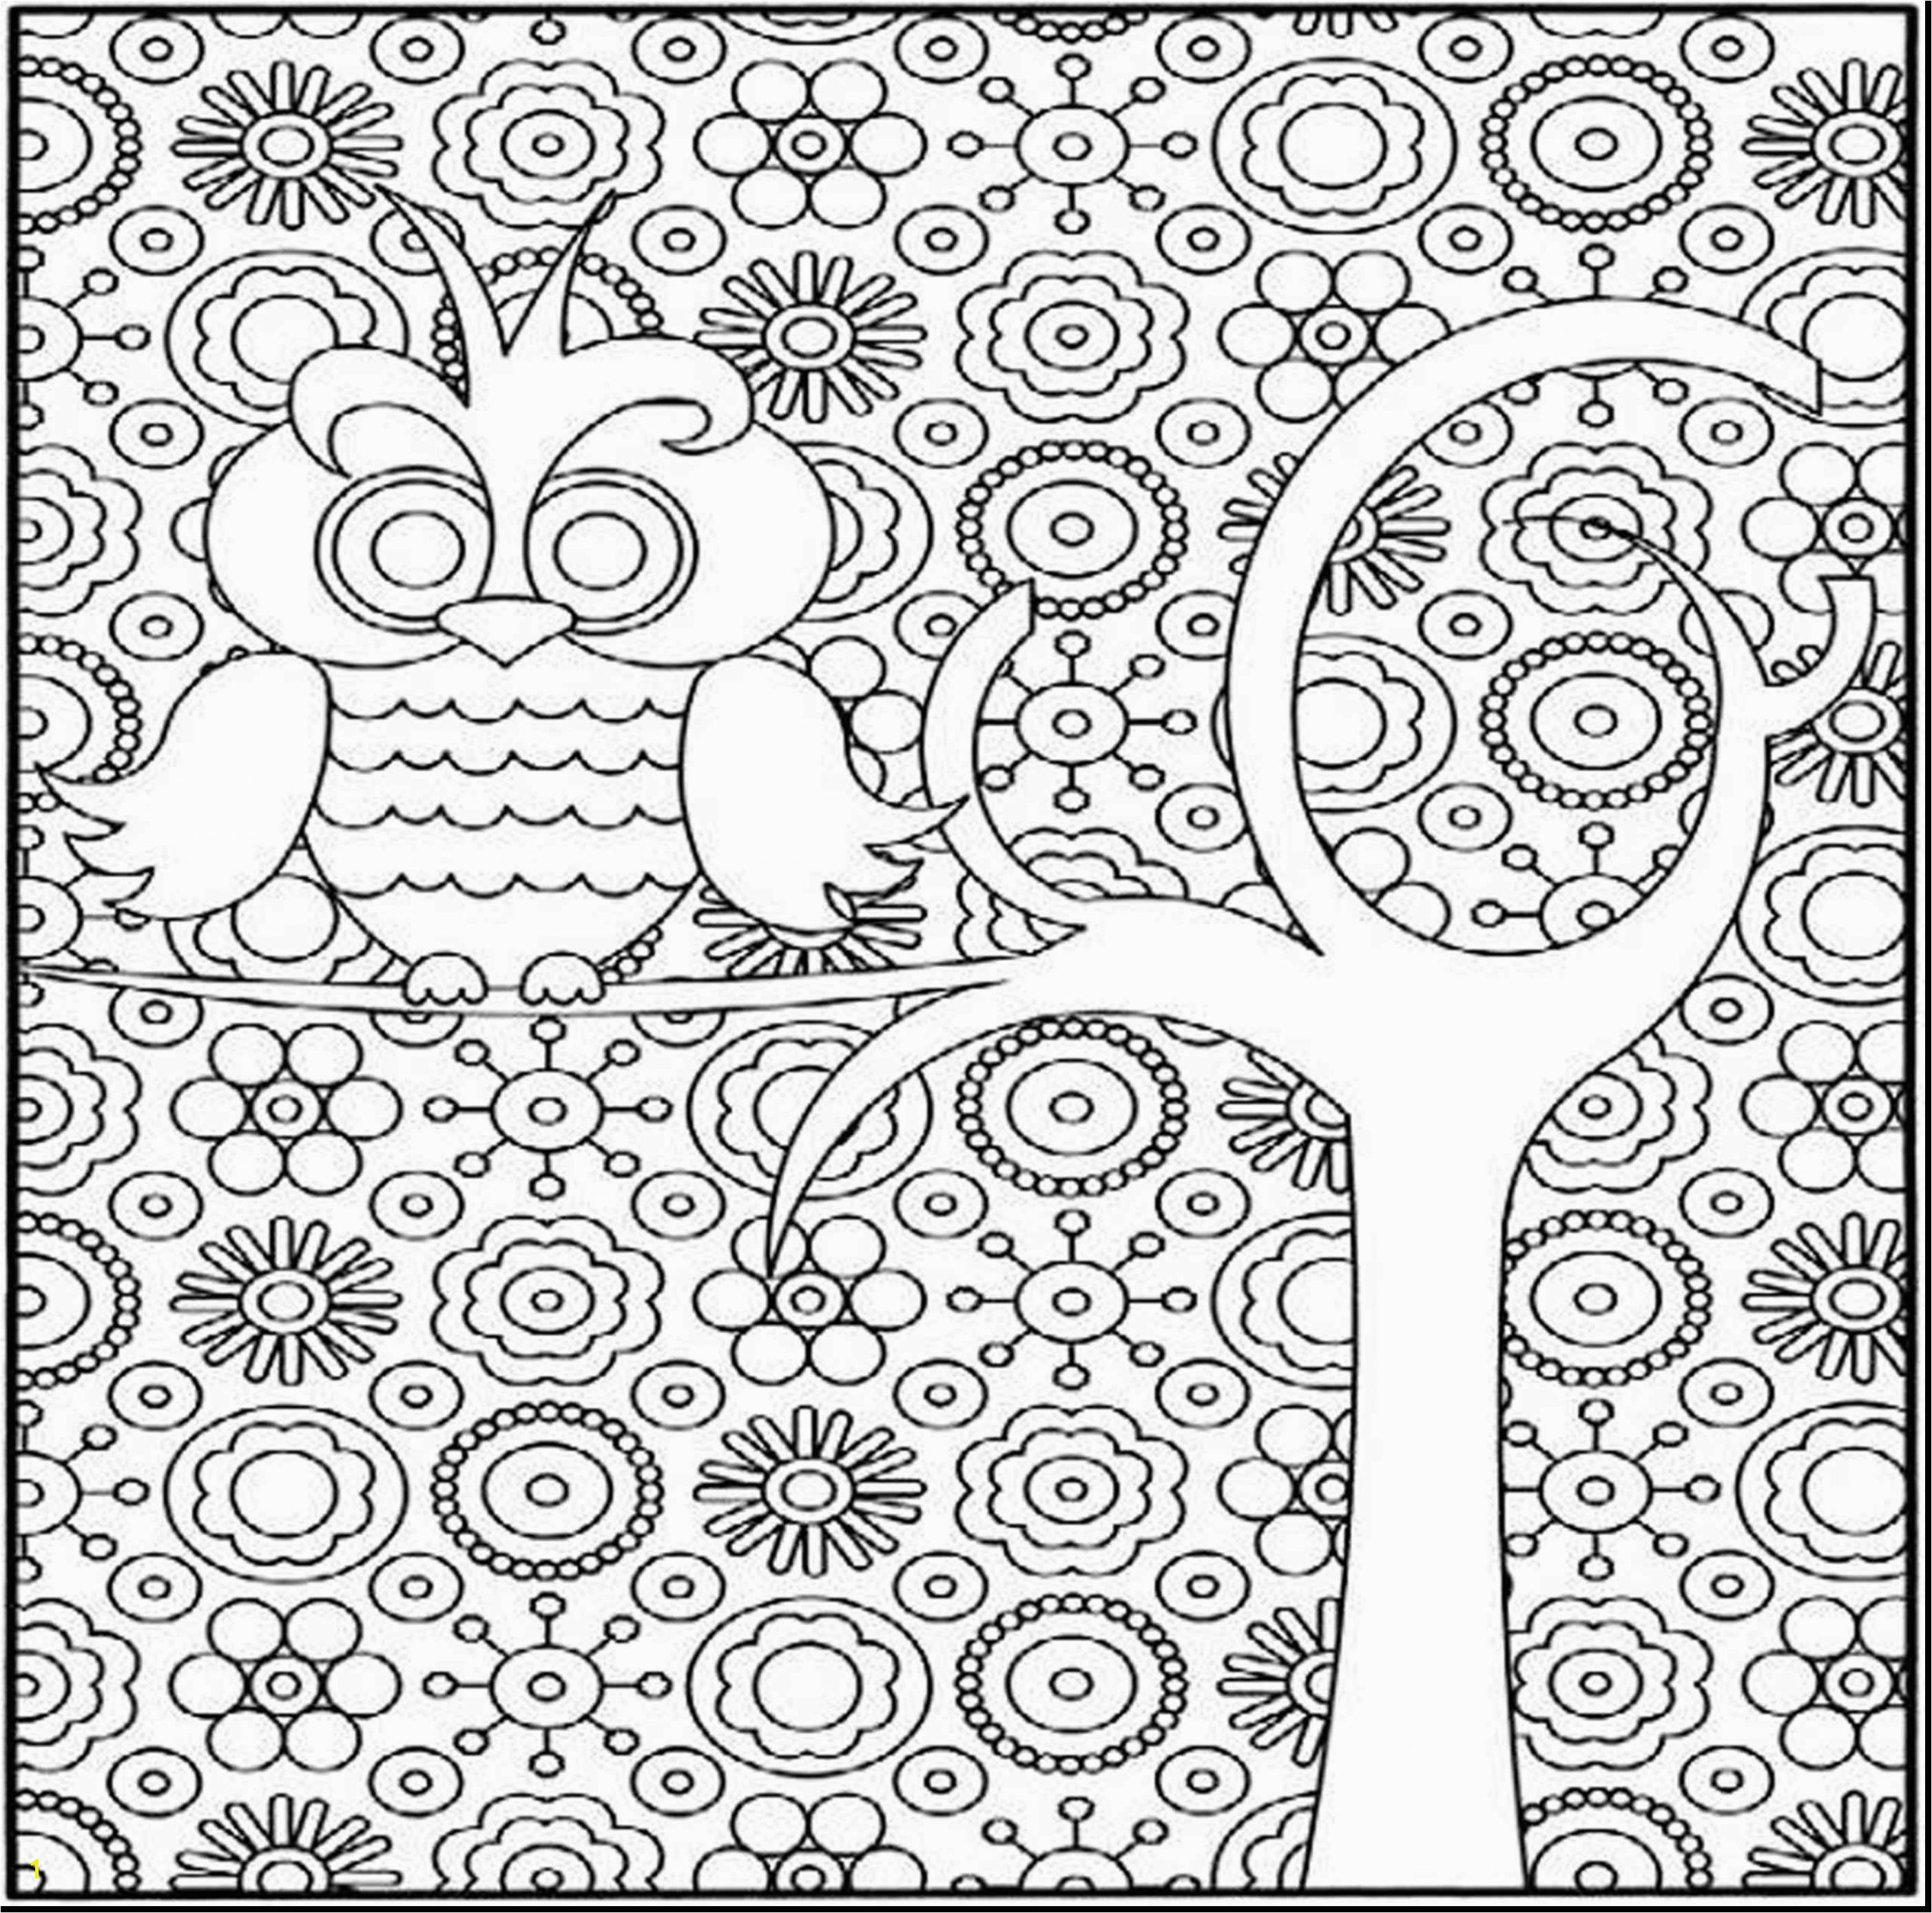 Abstract Coloring Pages for Teenagers Difficult Abstract Coloring Pages for Teenagers Difficult Awesome Hard Abstract